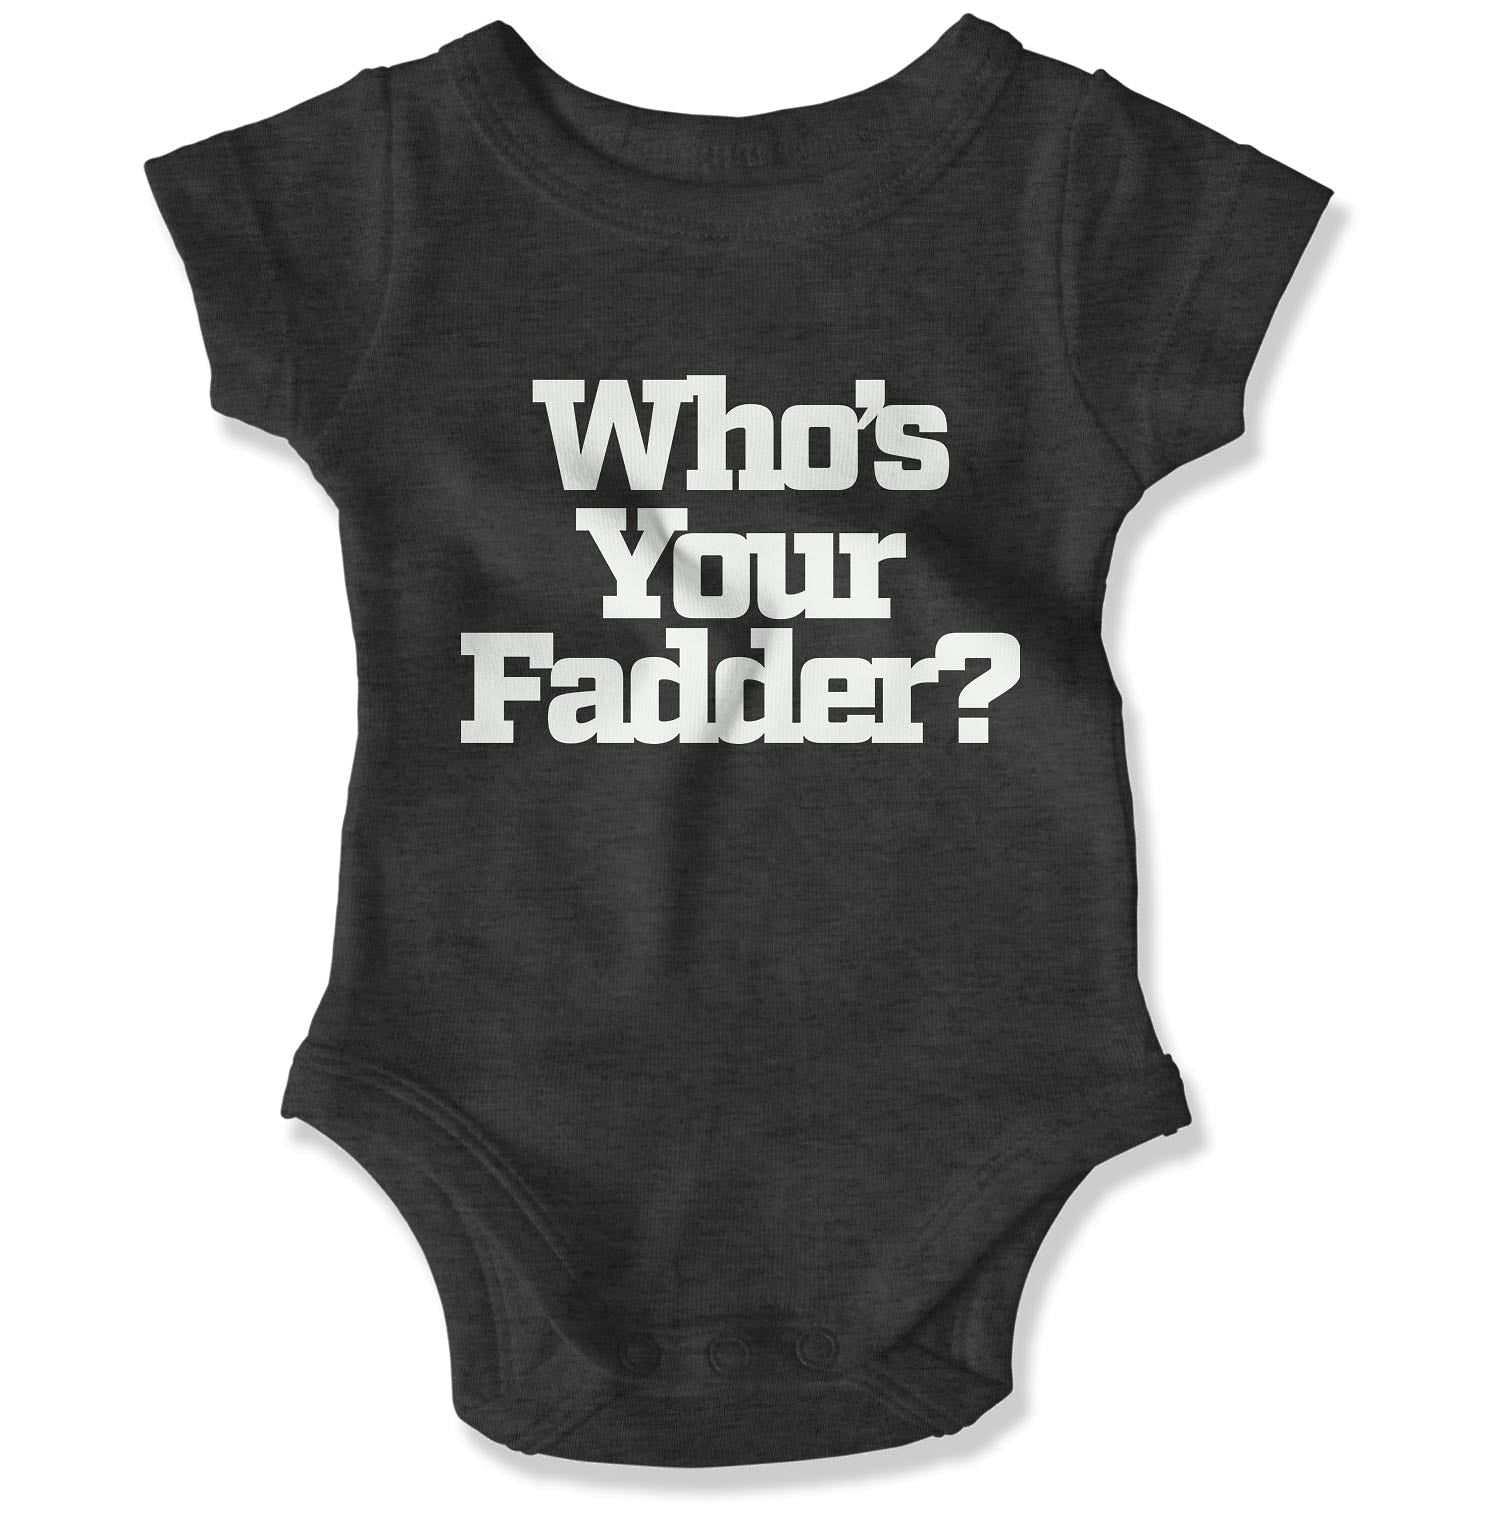 Who's Your Fadder? Baby Onesie-East Coast AF Apparel